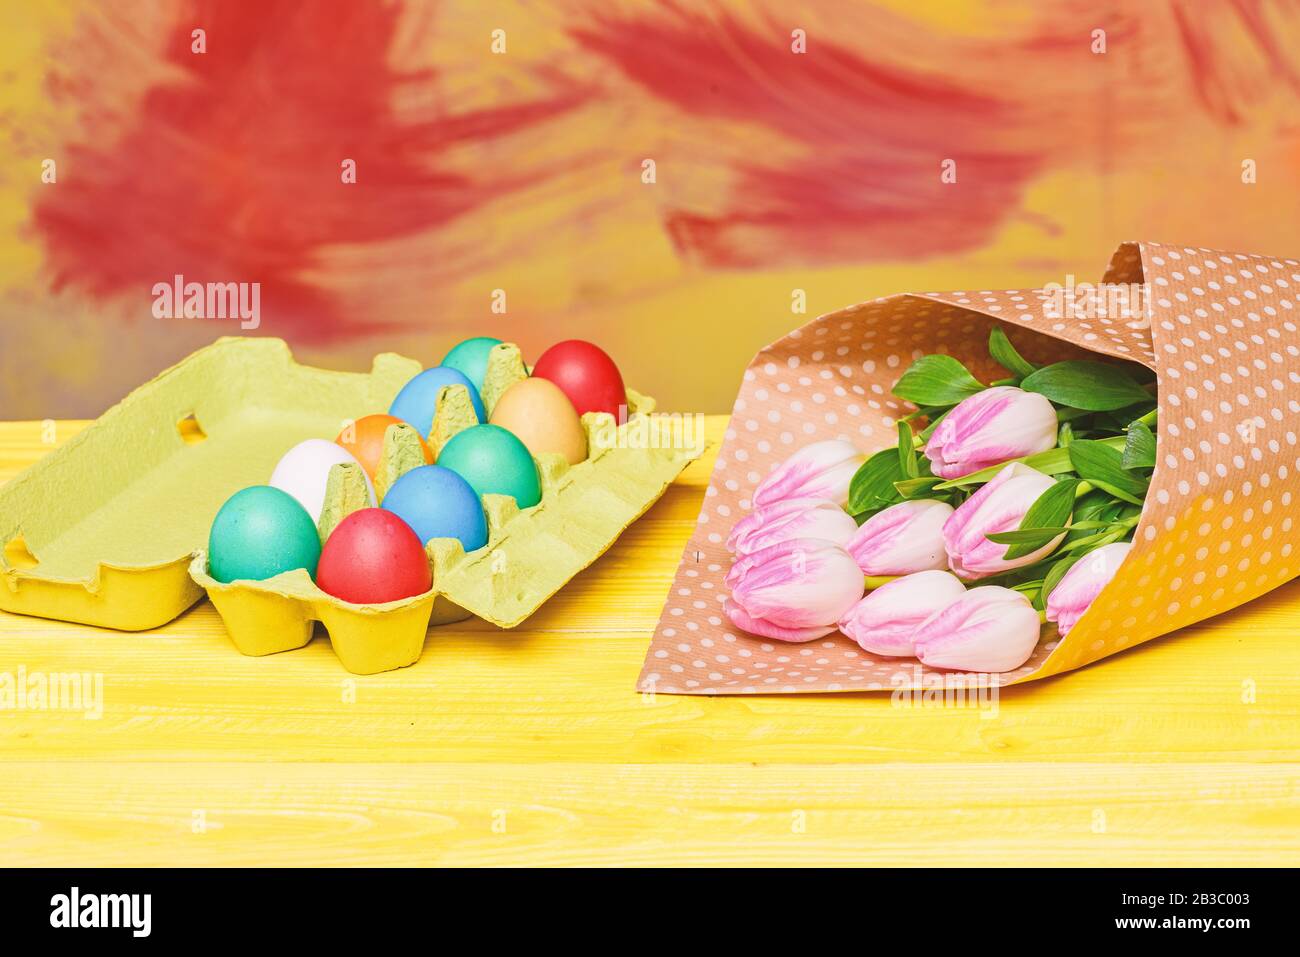 Egg hunt. painted eggs in egg tray. Spring holiday. Holiday celebration, preparation. Tulip flower bouquet. Healthy and happy holiday. Happy easter. Easter time. Stock Photo